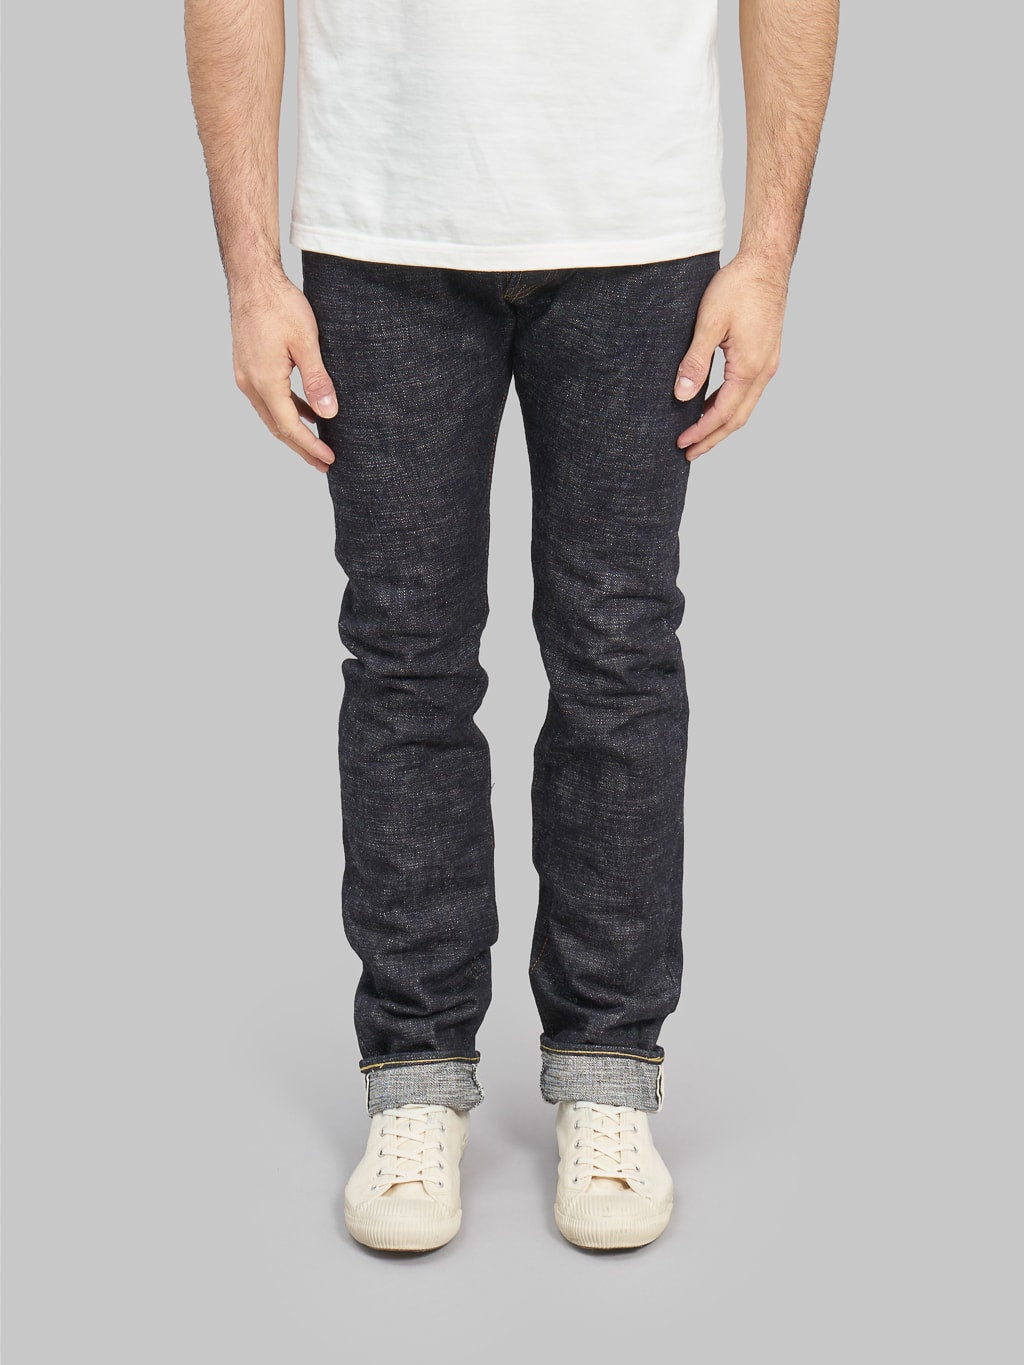 The Strike Gold 7109 Ultra Slubby Slim Tapered Jeans front